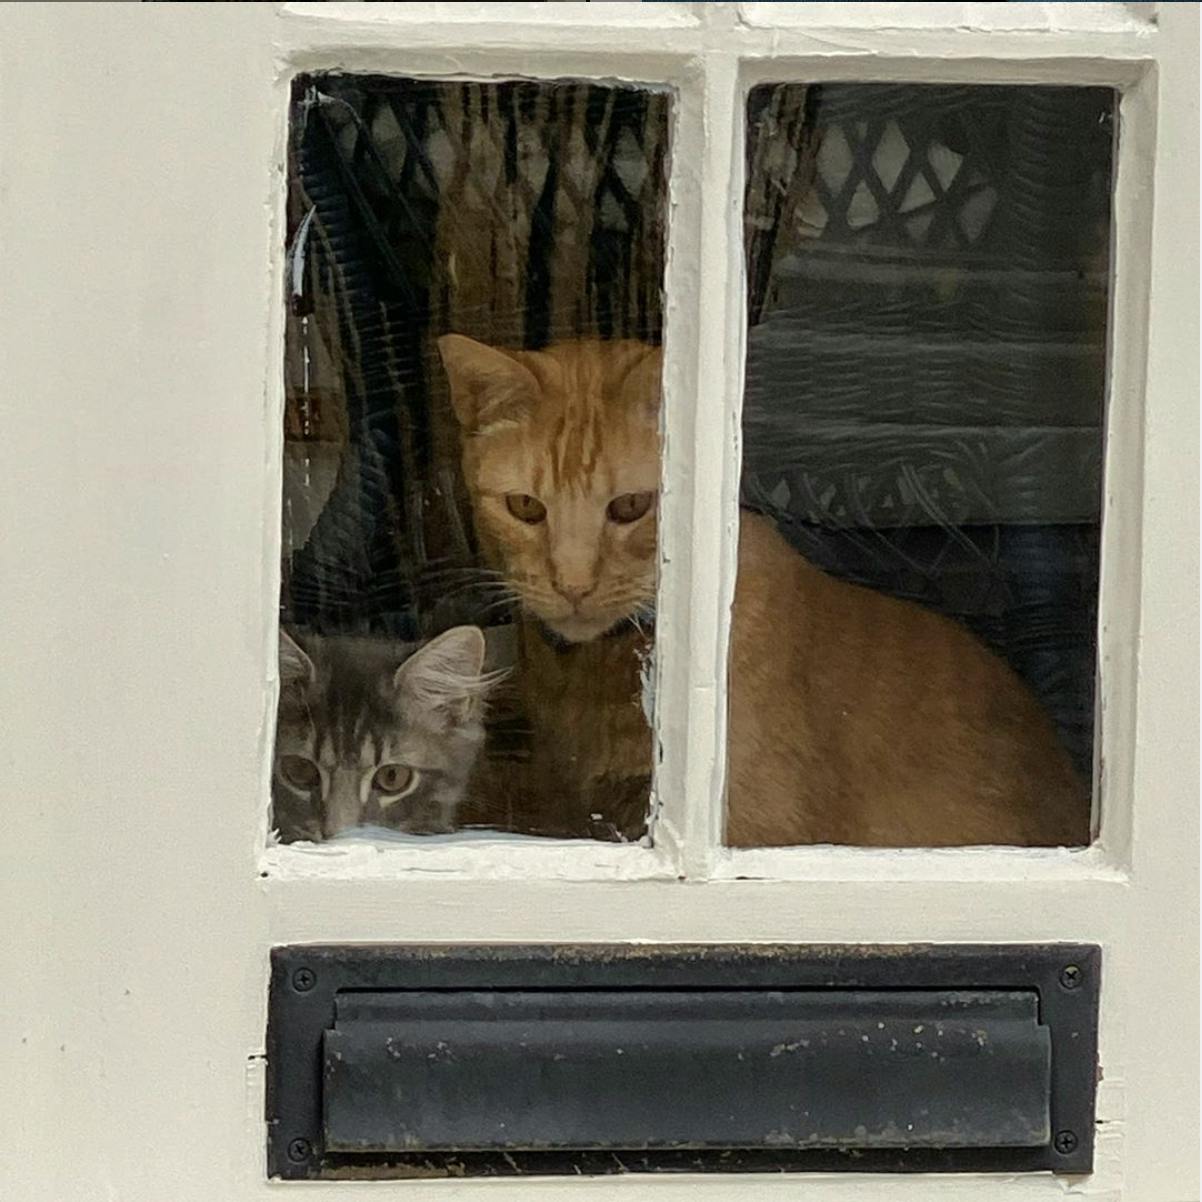 A curious orange tabby cat and a small, gray, longhaired kitten look through a windowpane above a mail slot.